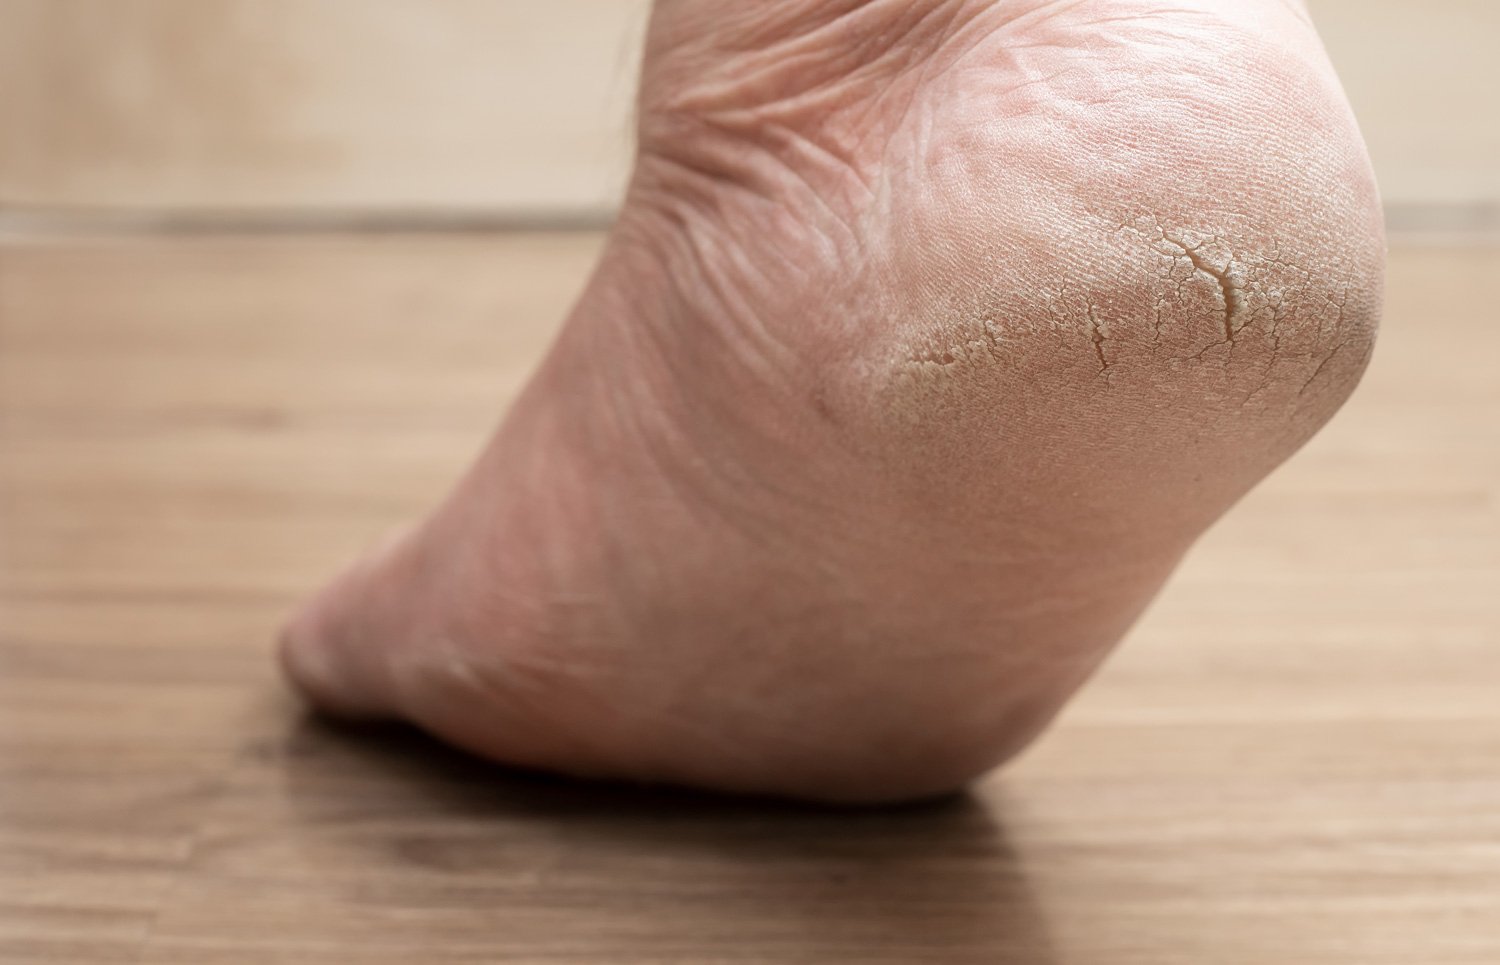 Cracked Heels | Causes, Care & Treatment Melbourne | Watsonia Podiatry